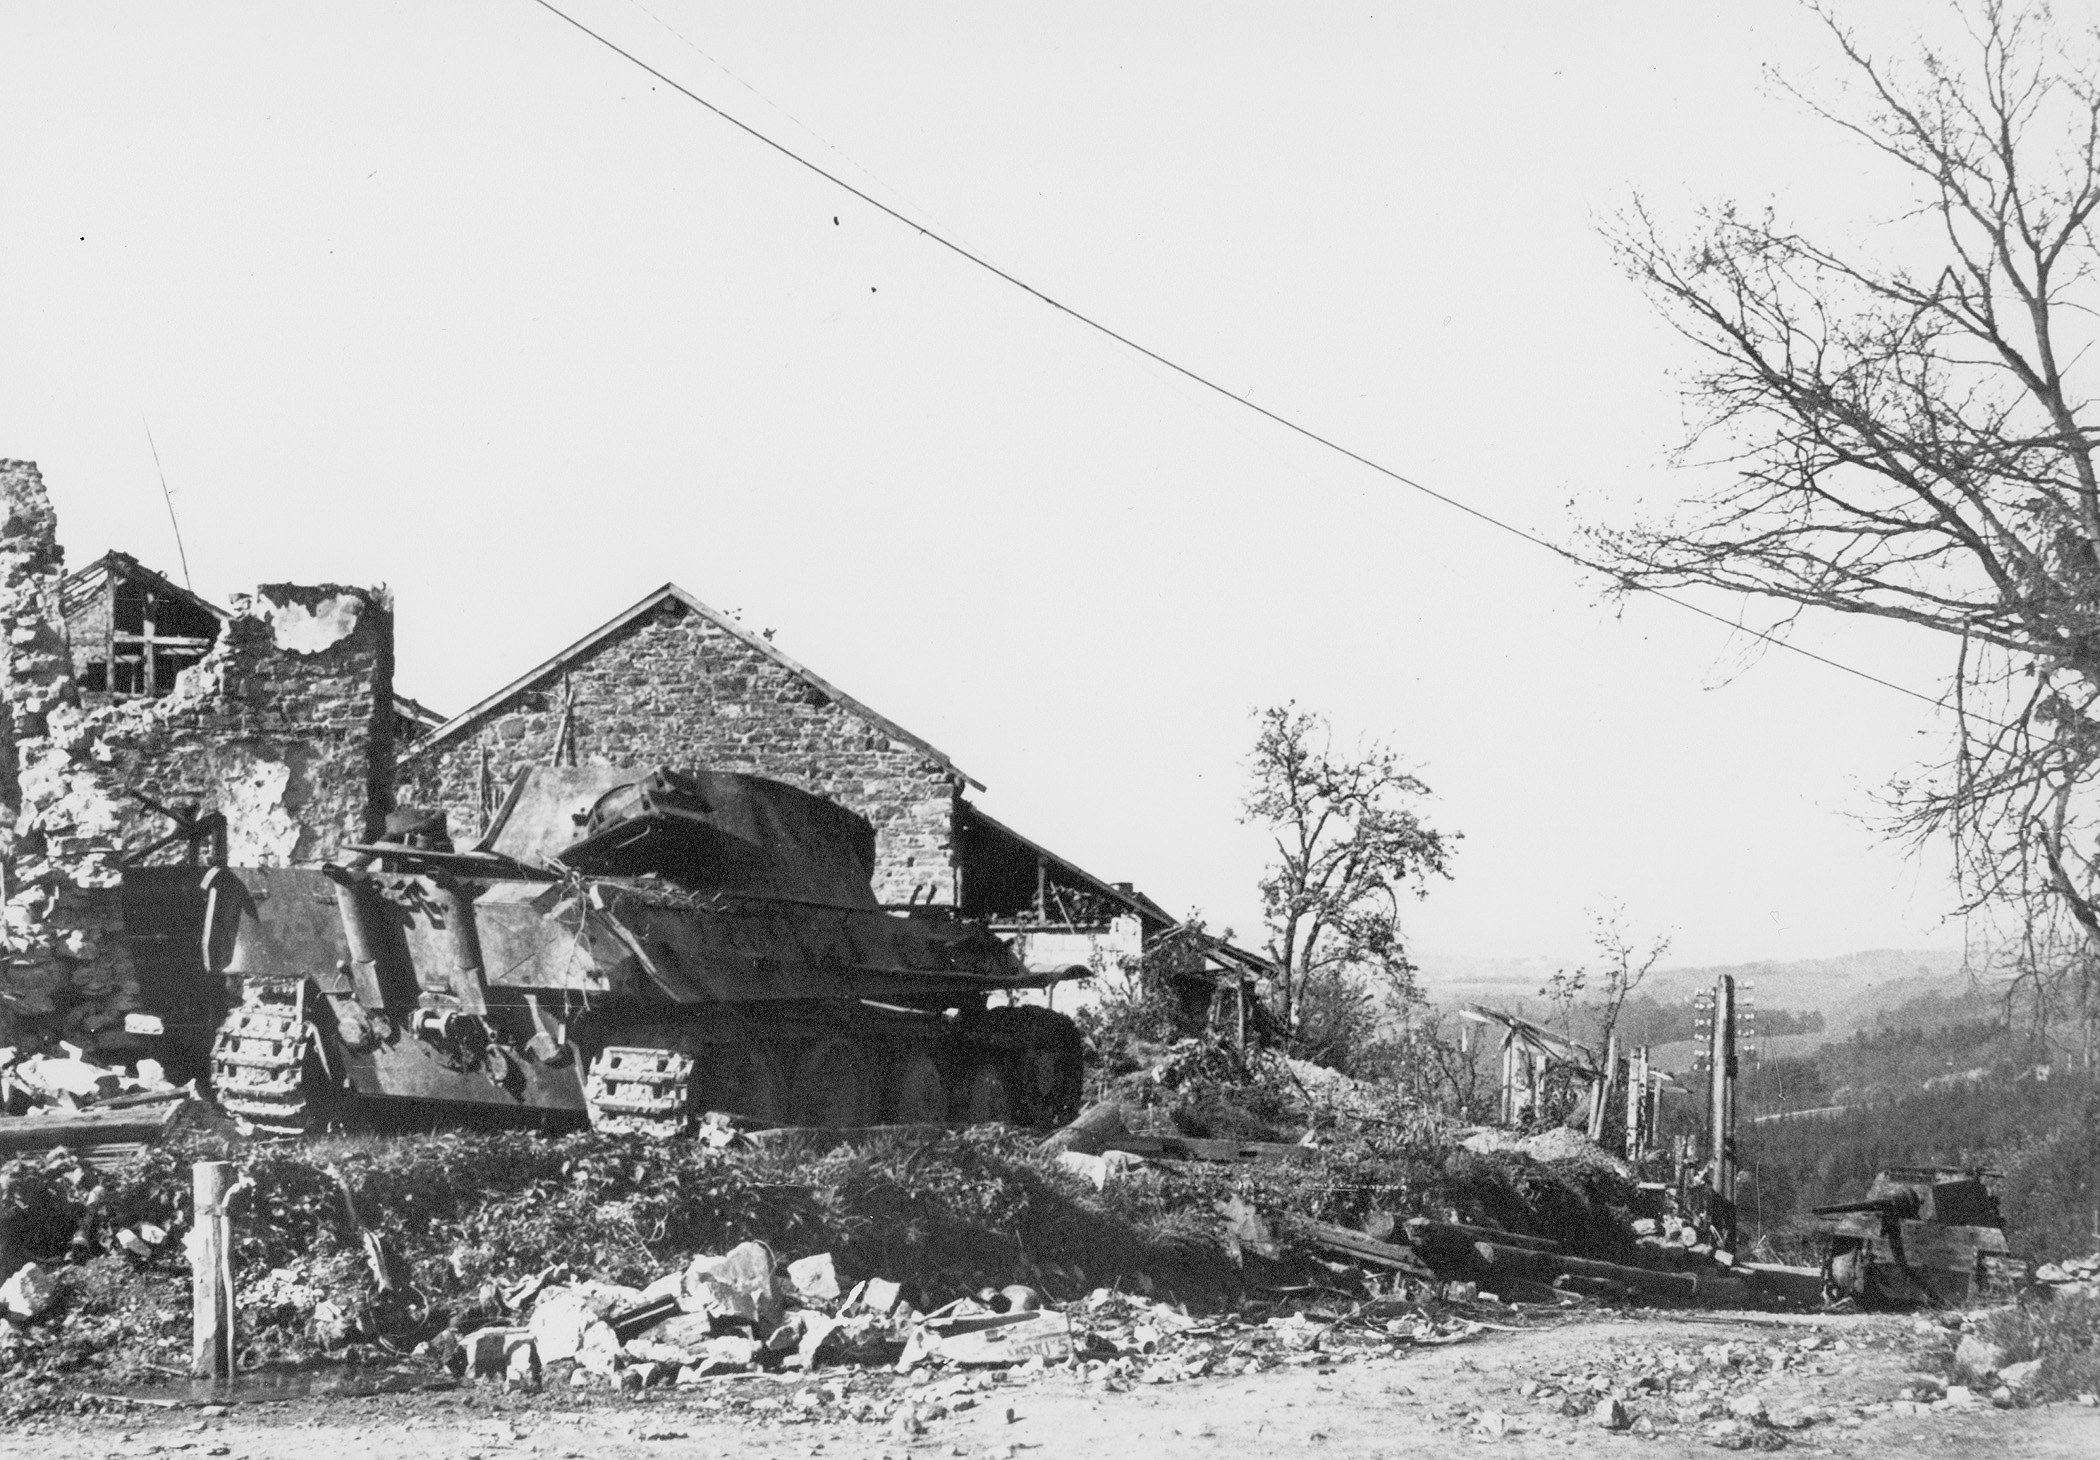 Following Peiper’s retreat from the Cauldron, a Panther medium tank (left) and a Tiger heavy tank lie derelict on a rubble-strewn hillside.